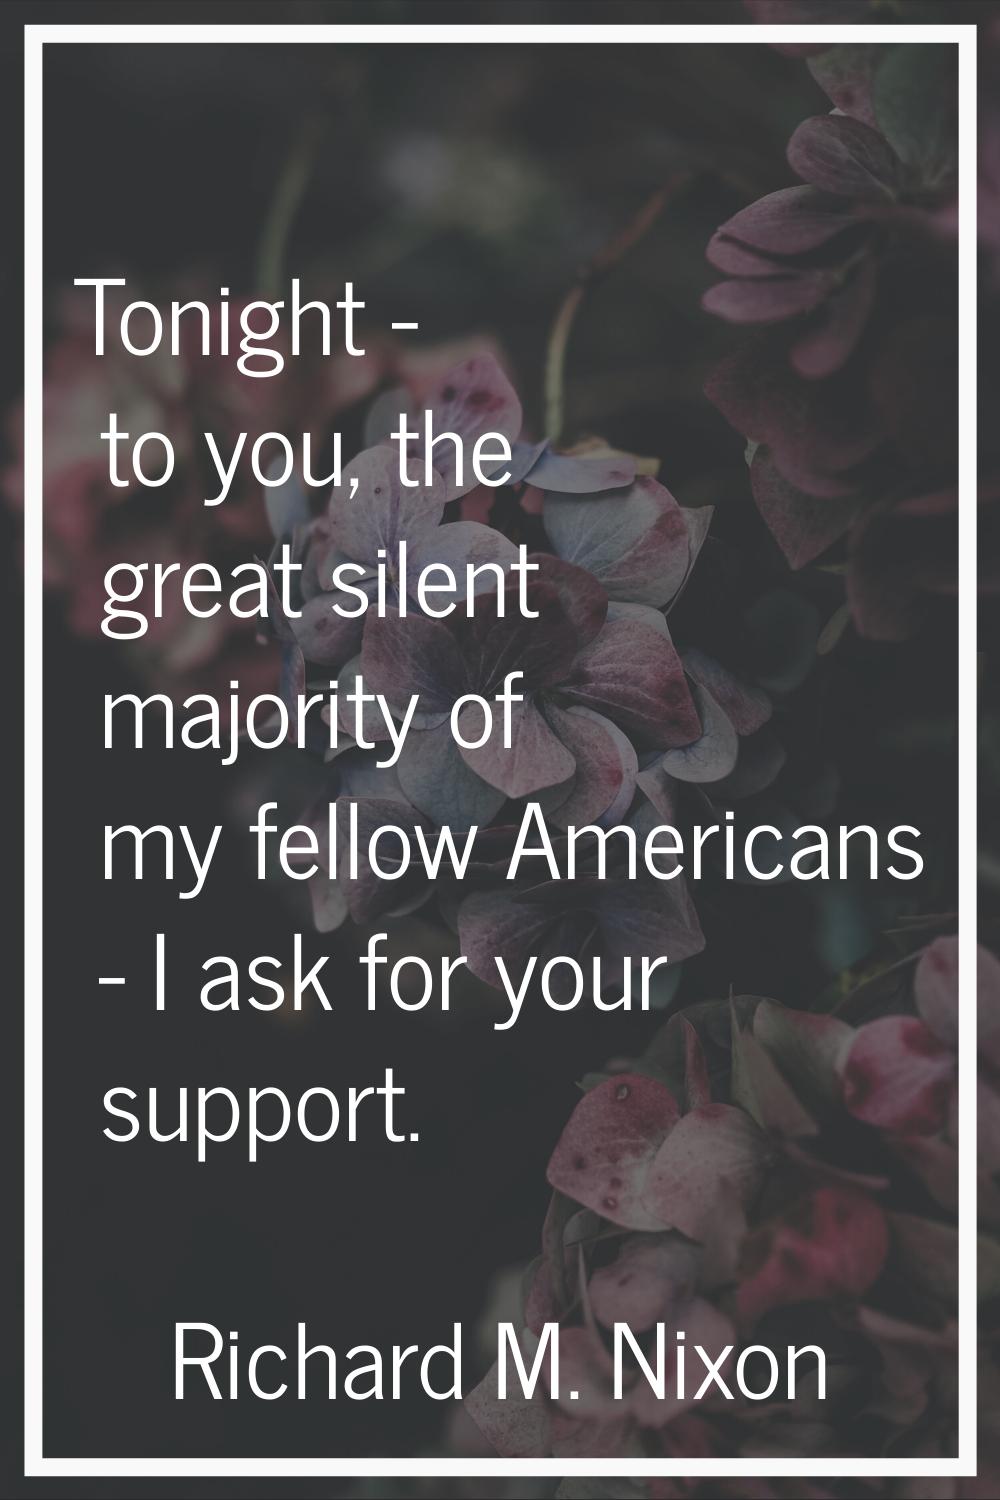 Tonight - to you, the great silent majority of my fellow Americans - I ask for your support.